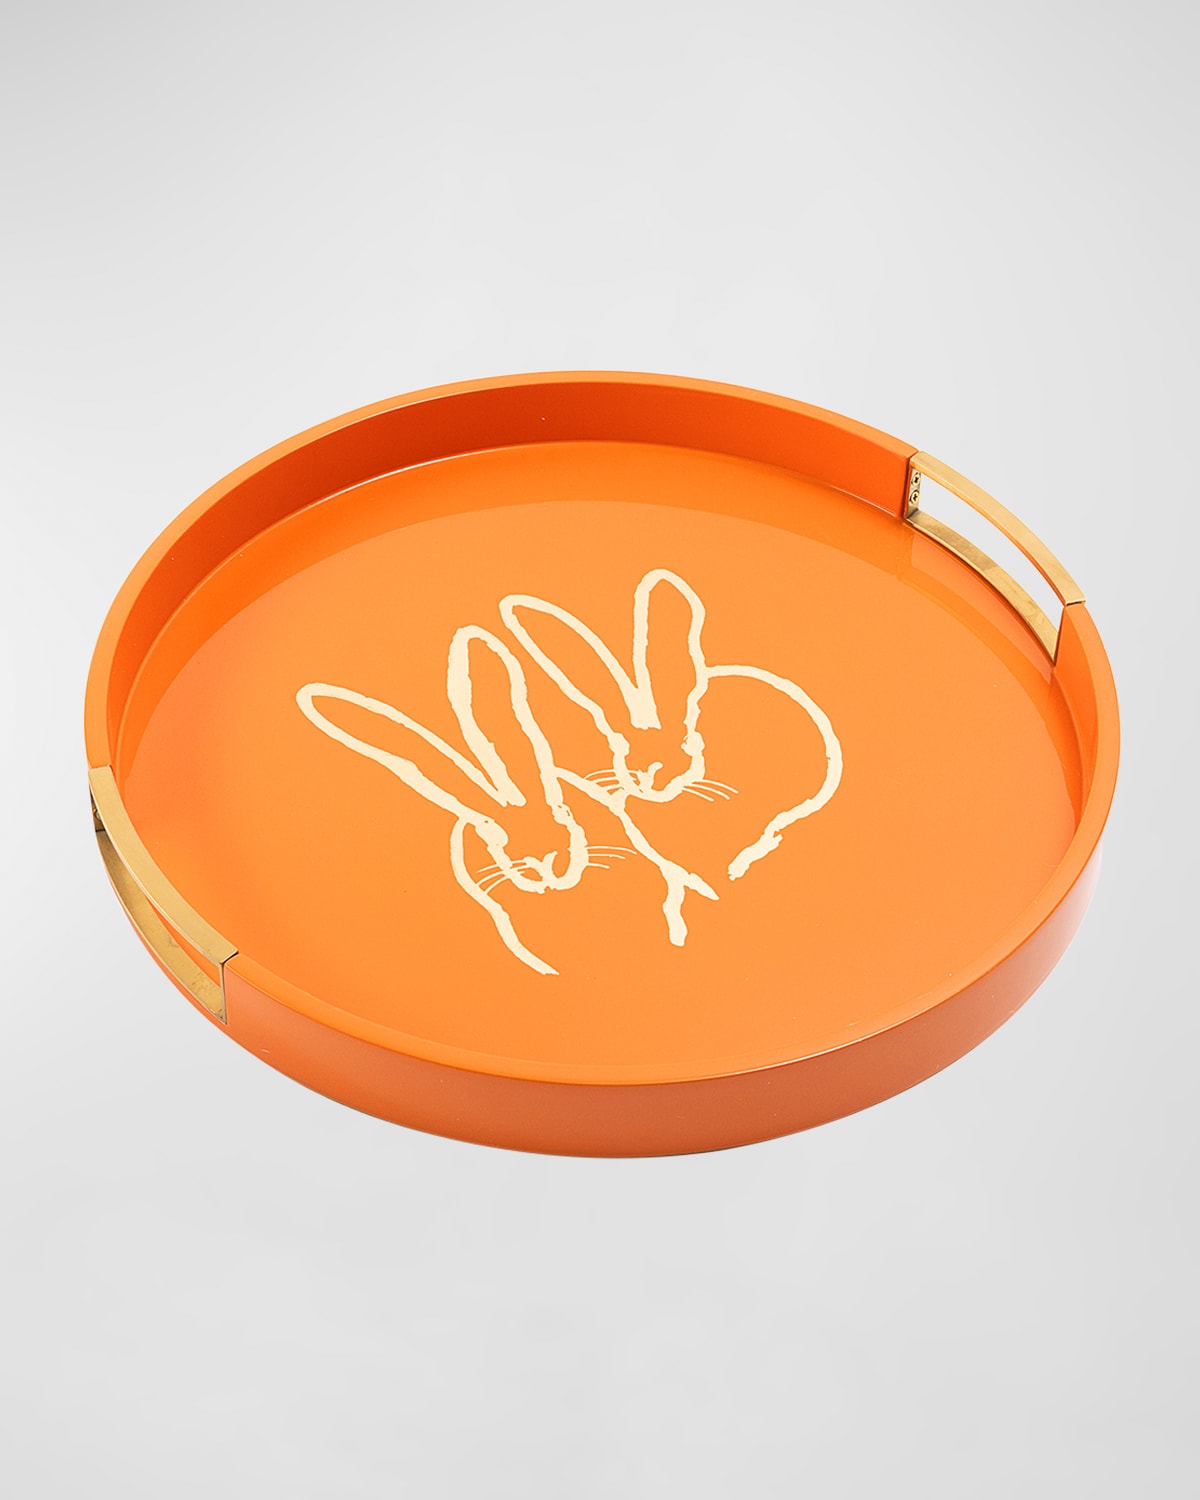 Bunny Drinks Lacquer Tray With Brass Handles